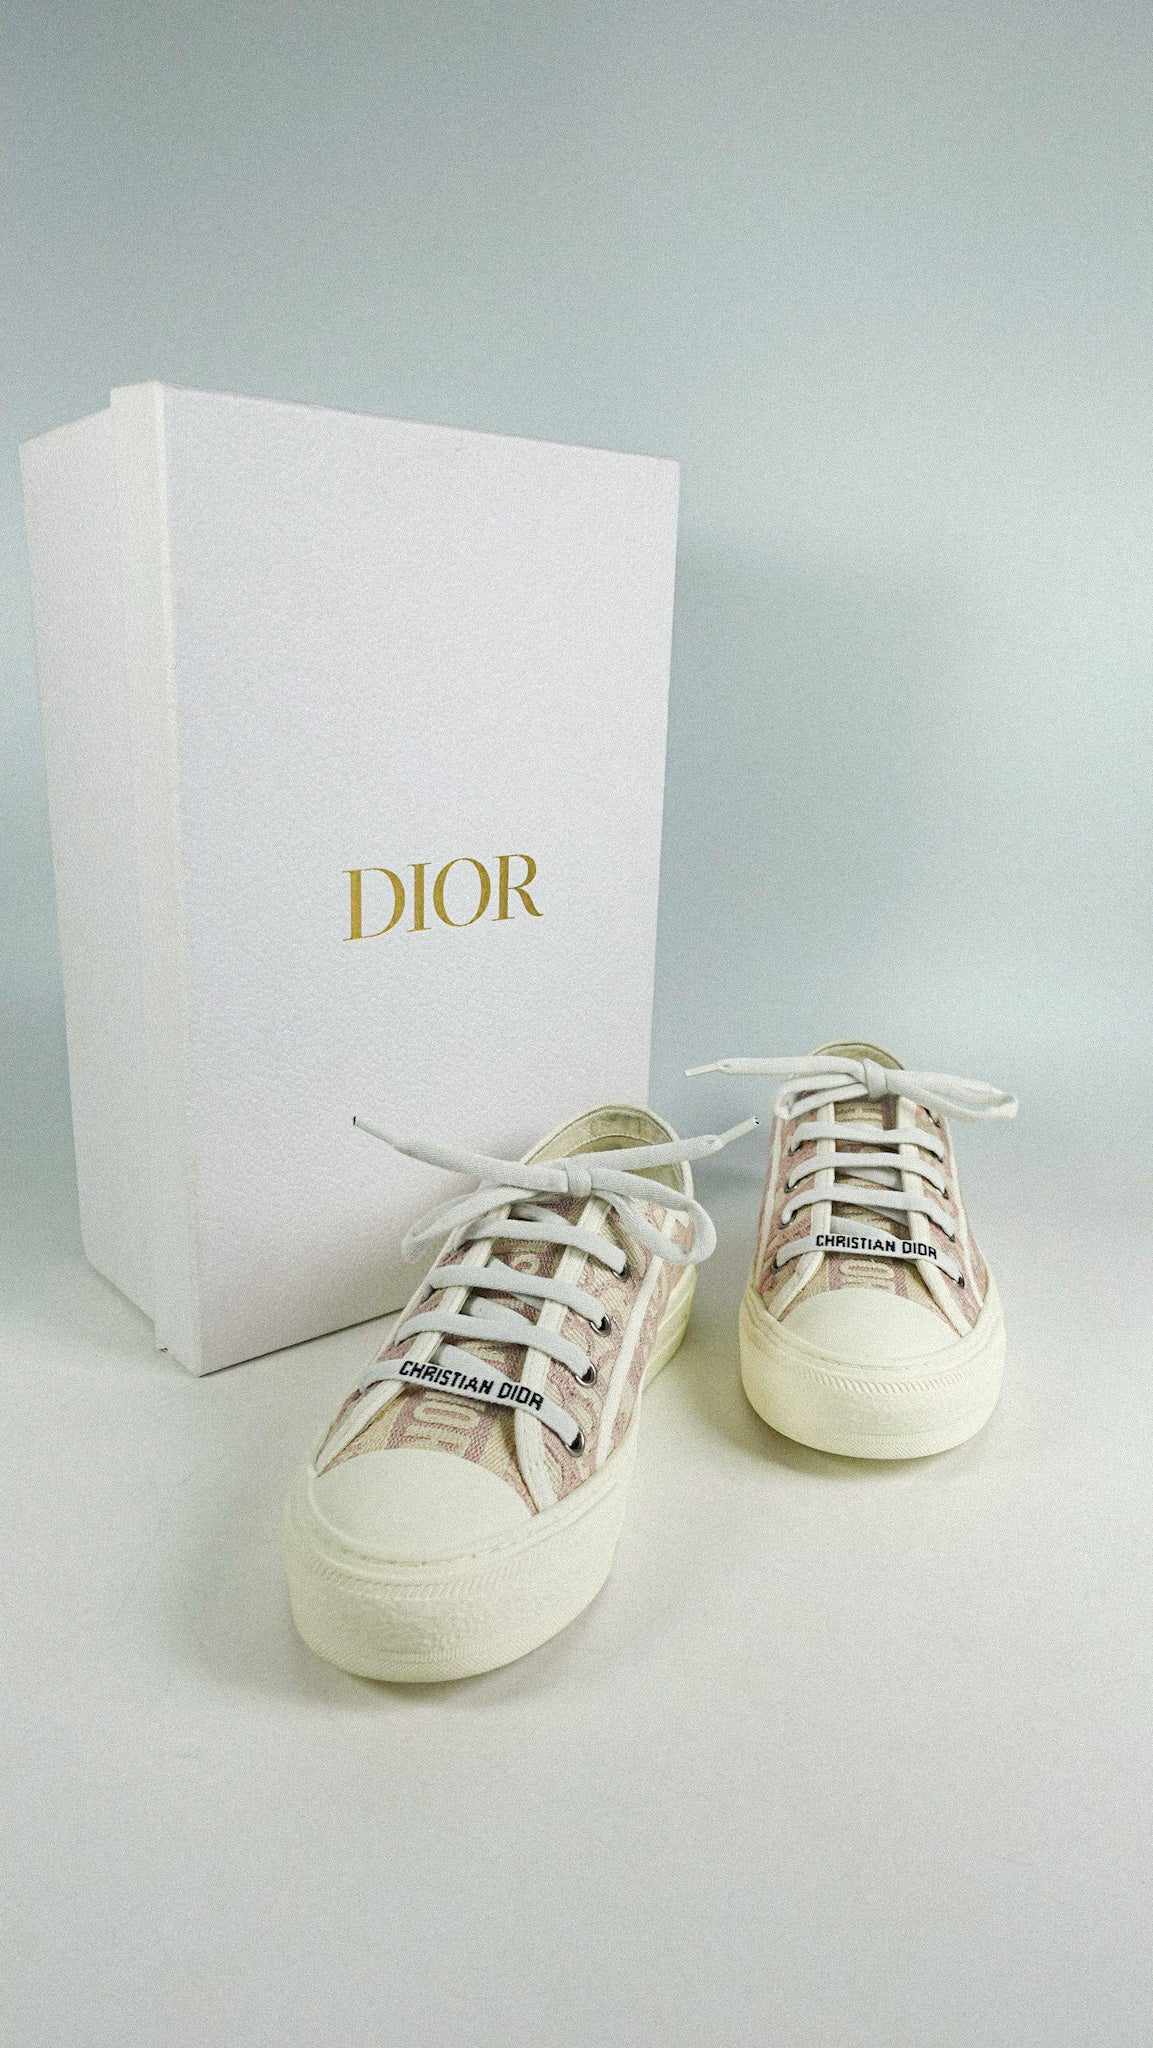 Christian Dior Nude Oblique Embroid Walk’n’ Dior shoes